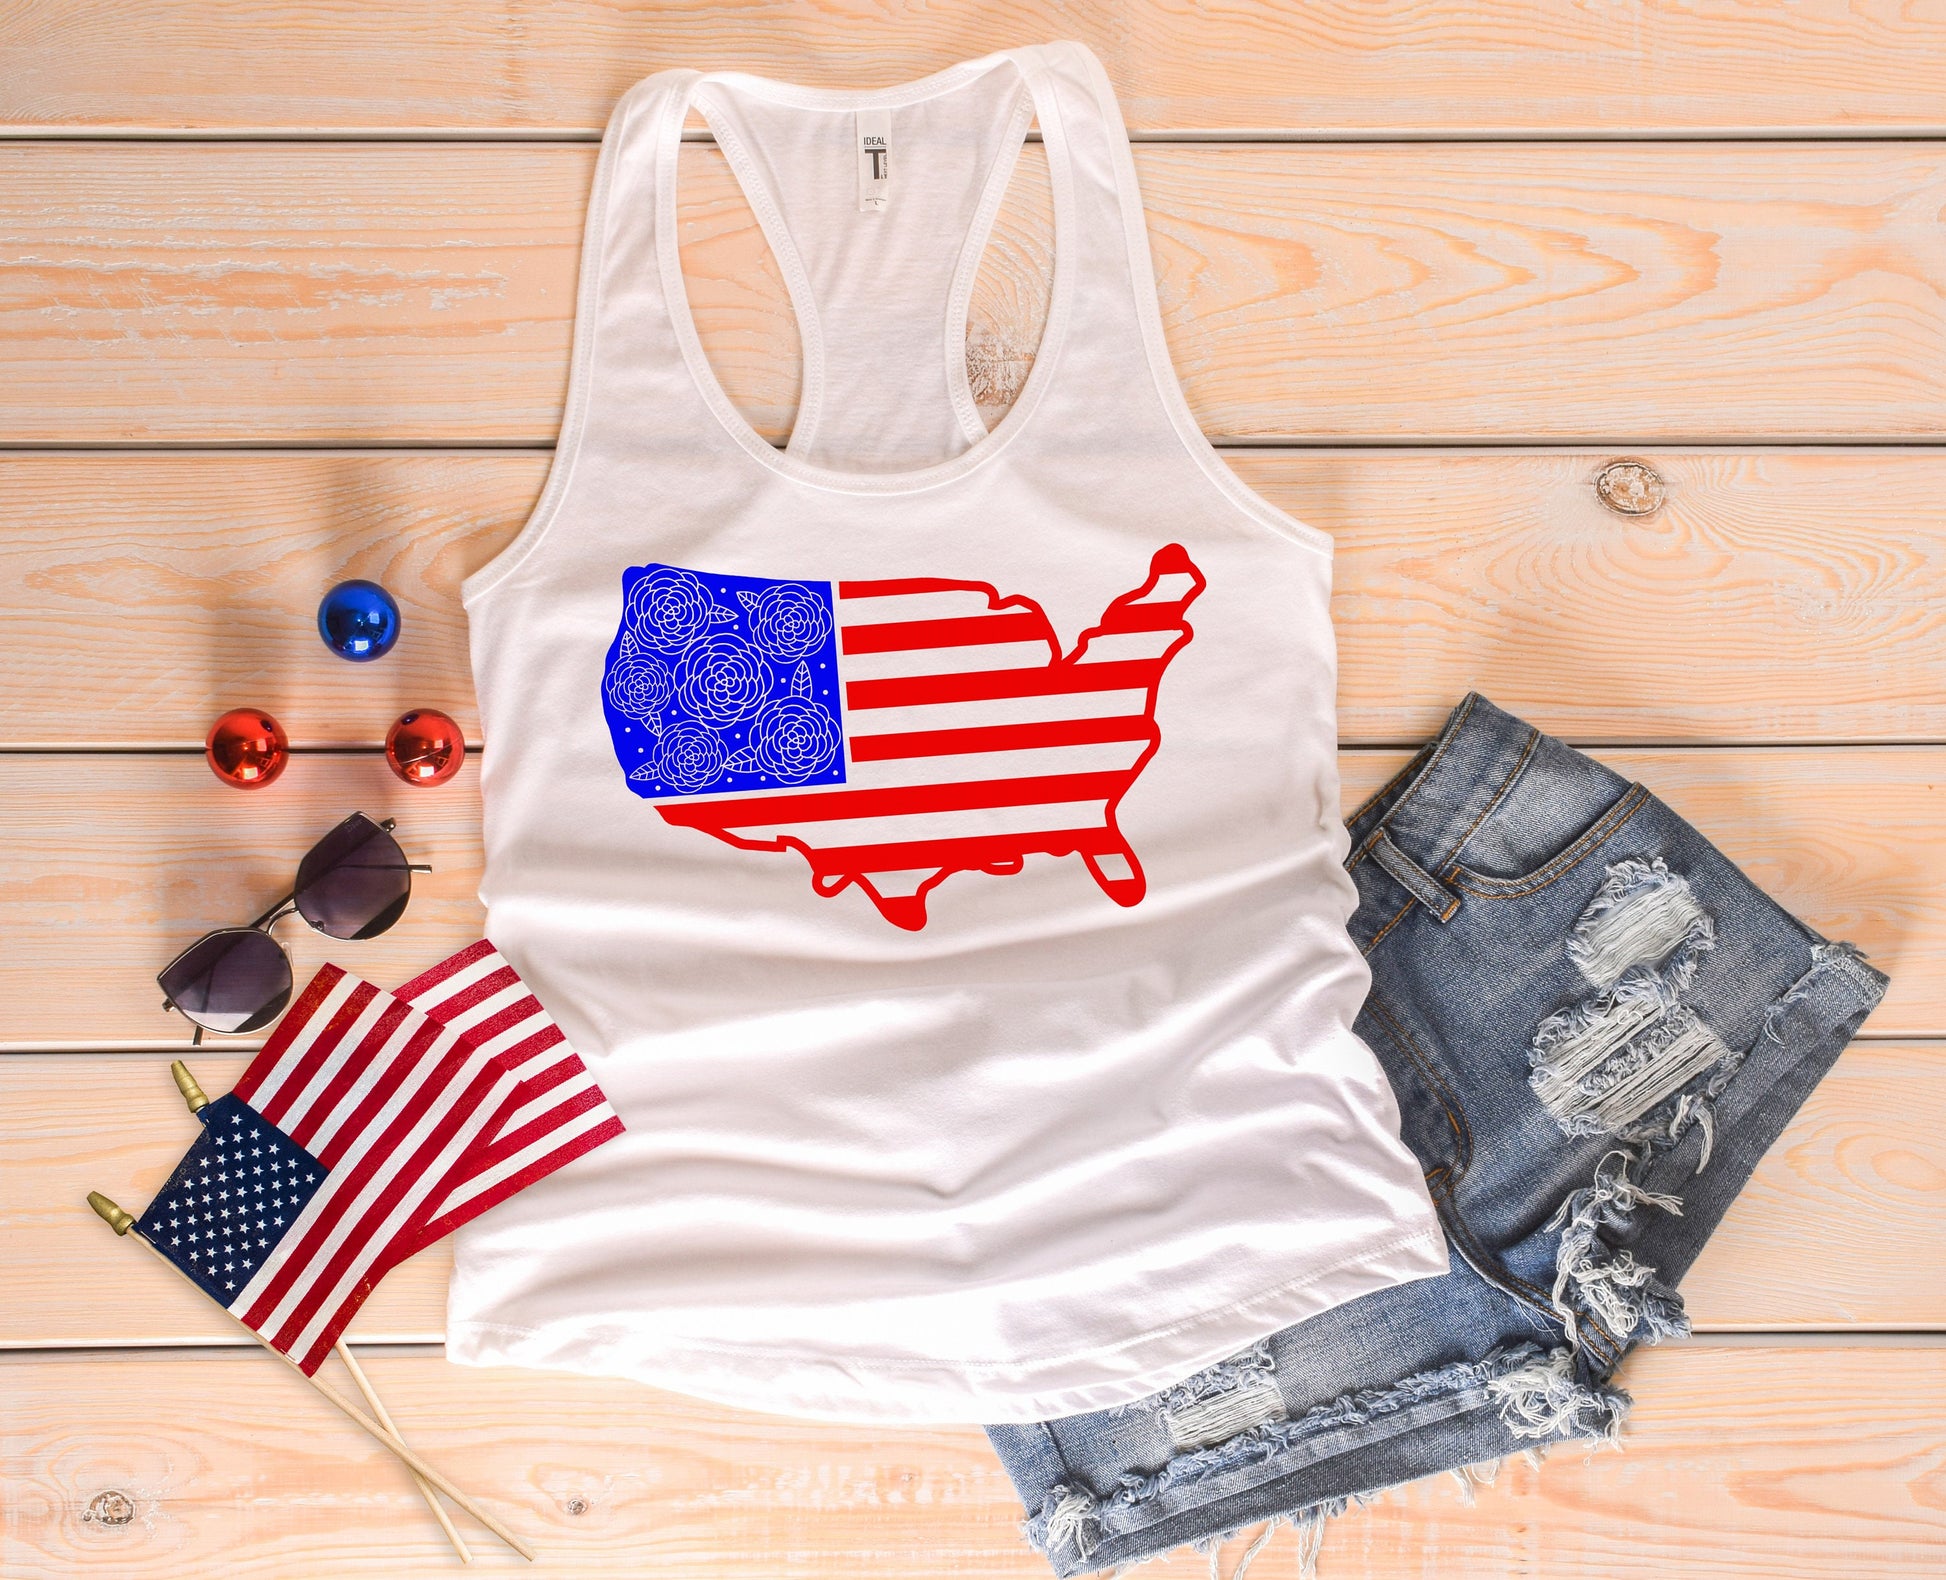 Floral USA racerback tank t-shirt - 4th of july tank top - patriotic tank top - fourth of july shirt - 4th of july shirt - merica tank